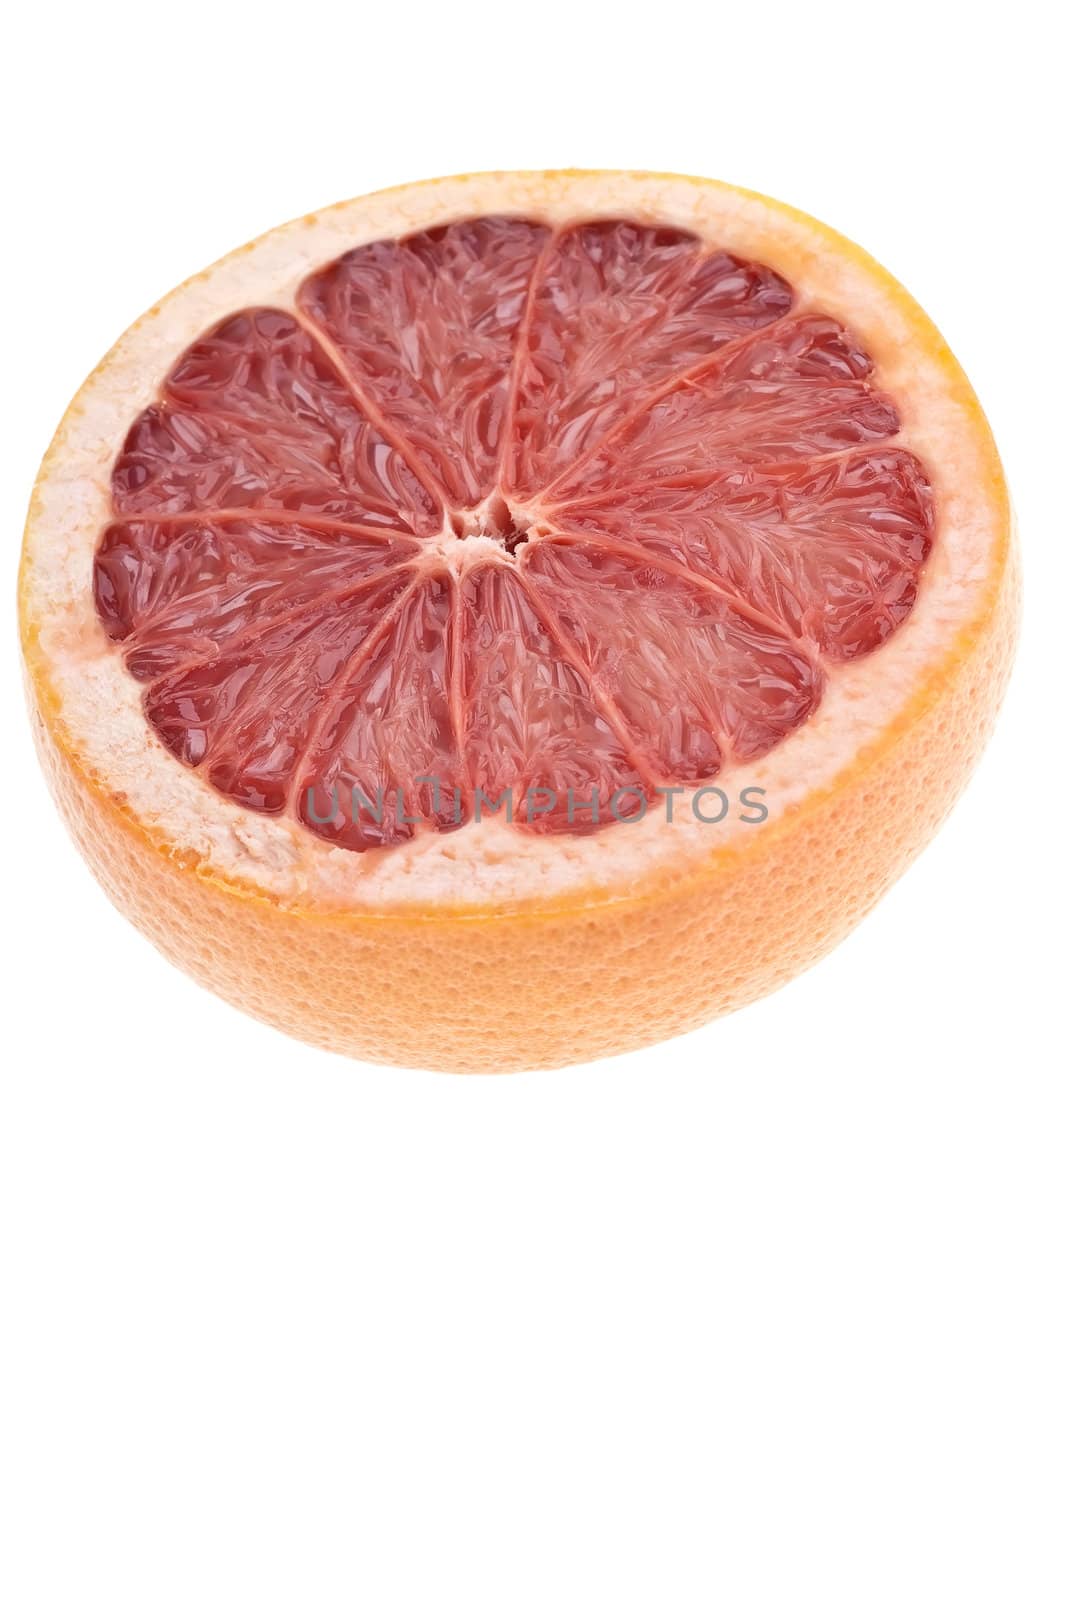 Grapefruit by Marcus